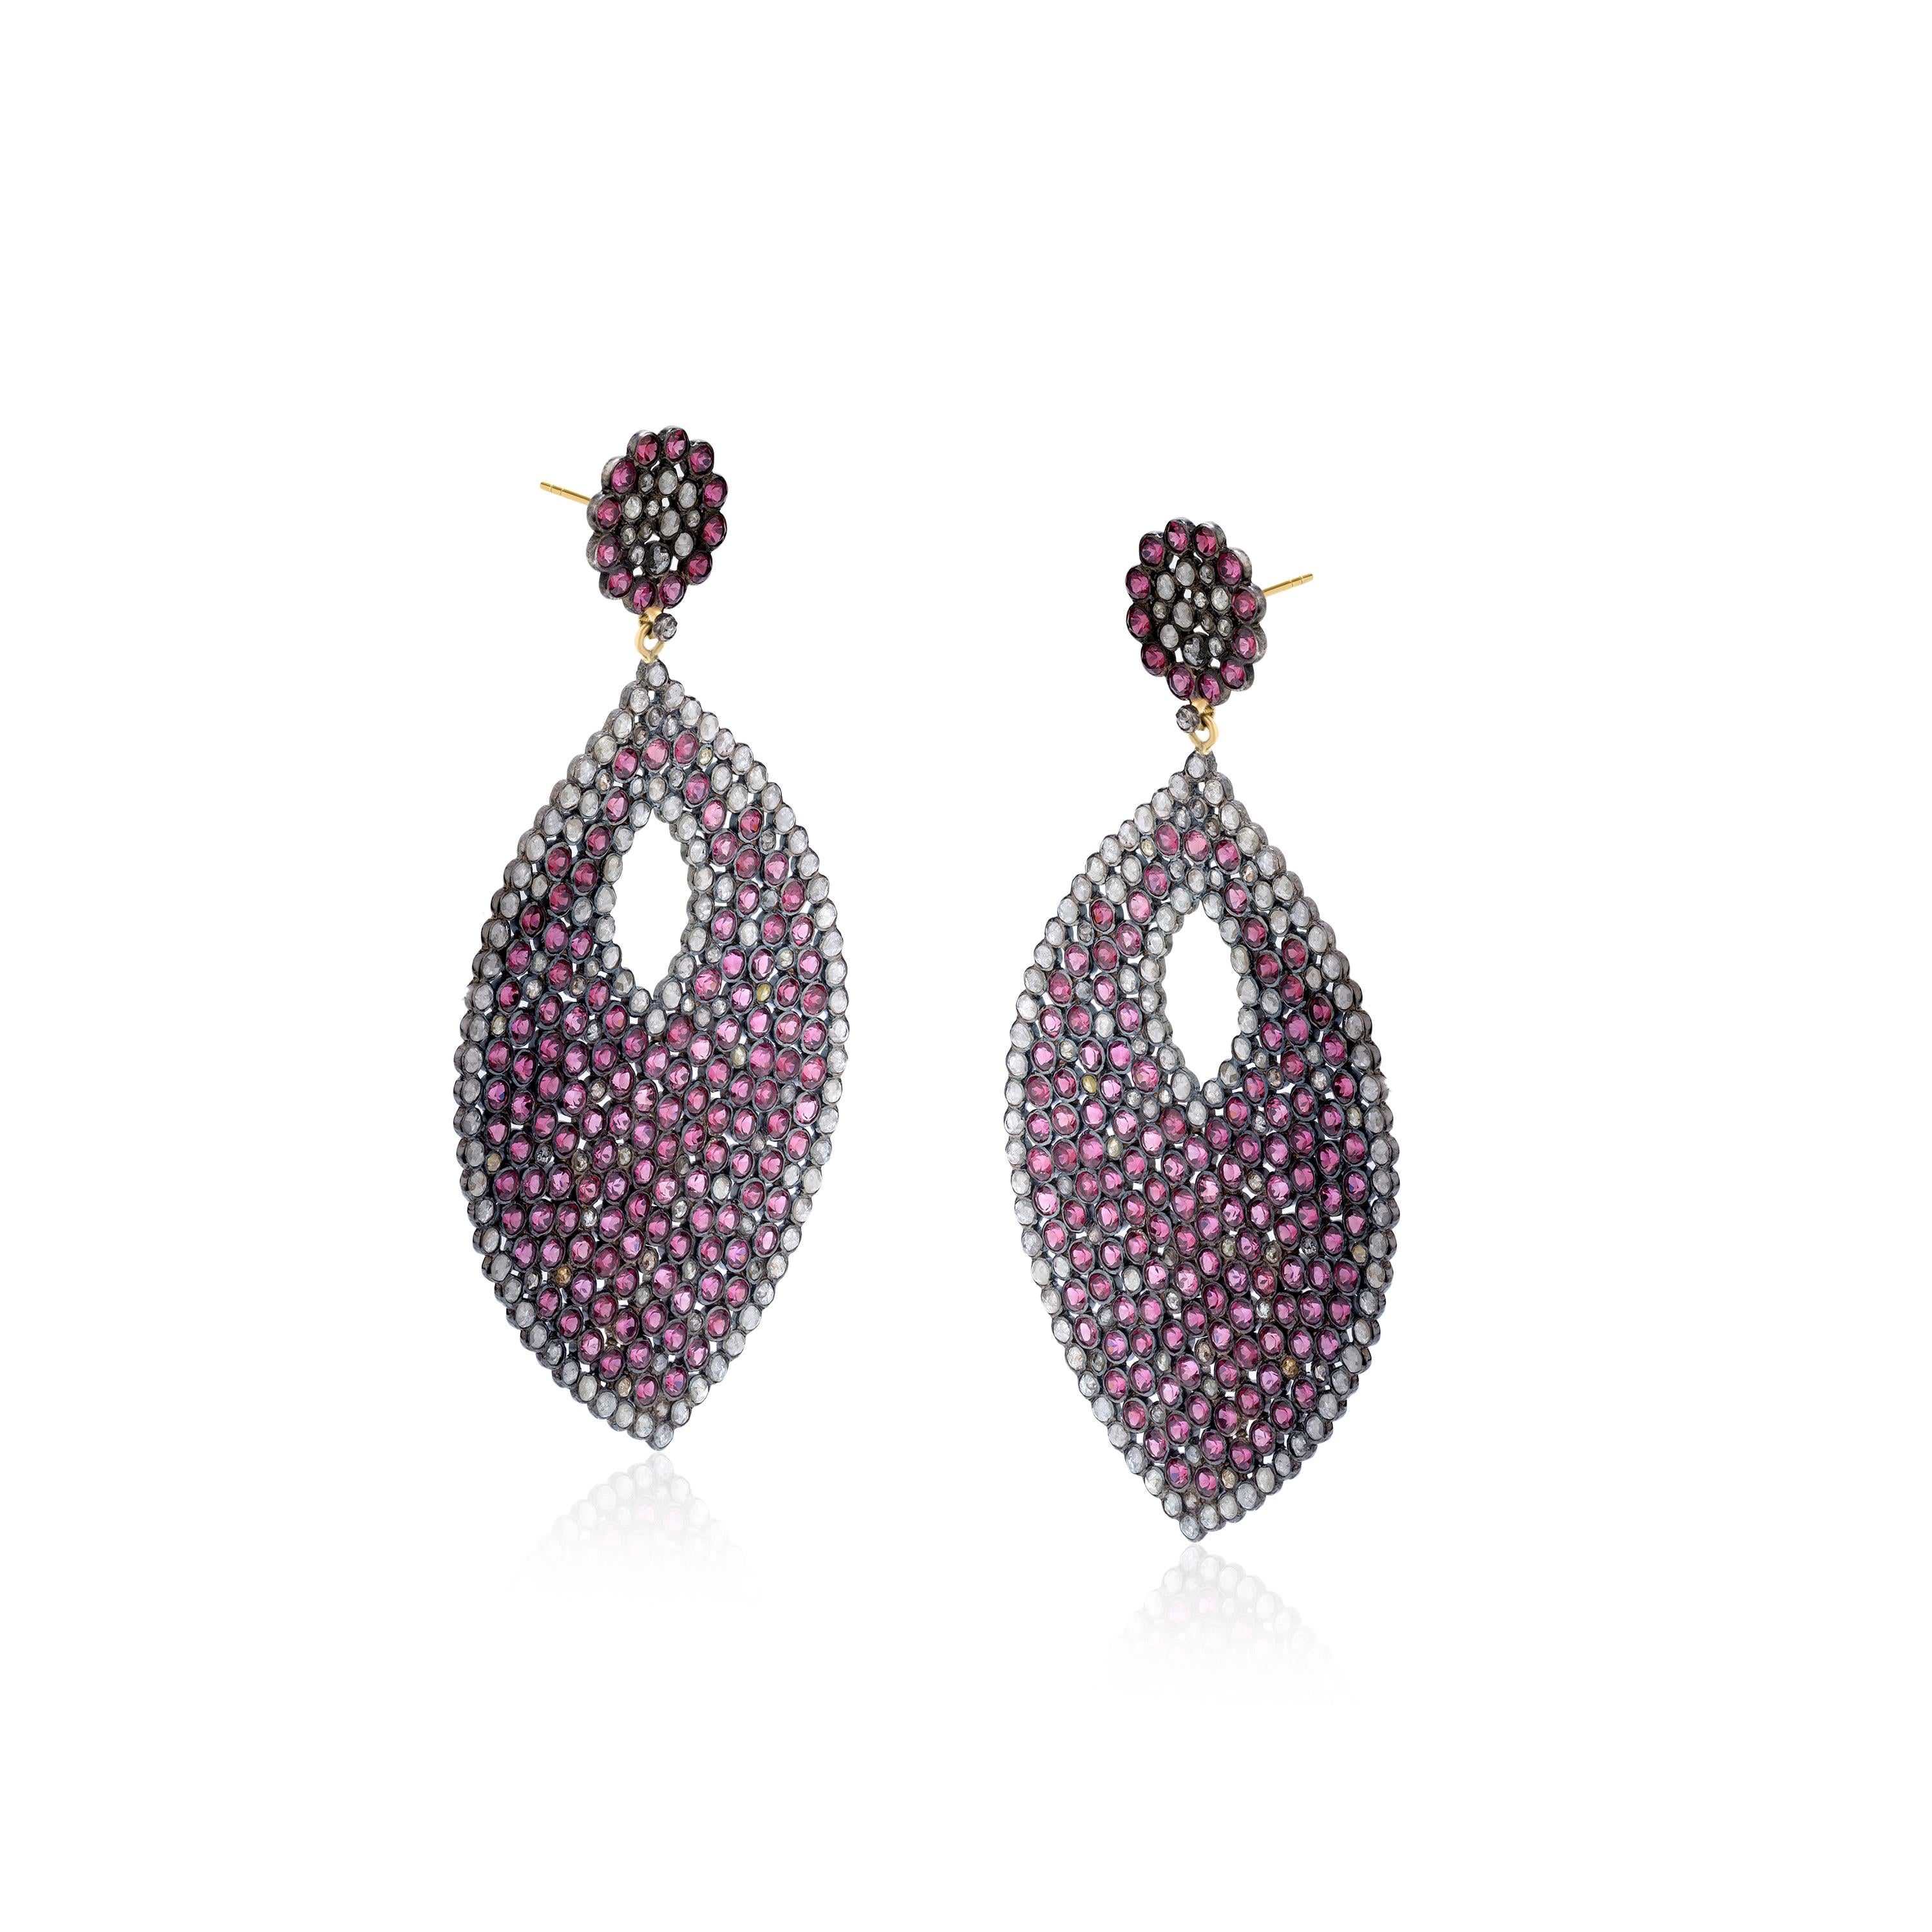 This Gemistry, classic drop earrings in leafy shape are manifested in 18K/925 White, Yellow & Black Rhodium Sterling Silver. The earrings are well decorated with diamonds, weighing 6.78 Cts. Sparkling pink tourmaline stones glam up the silver body.